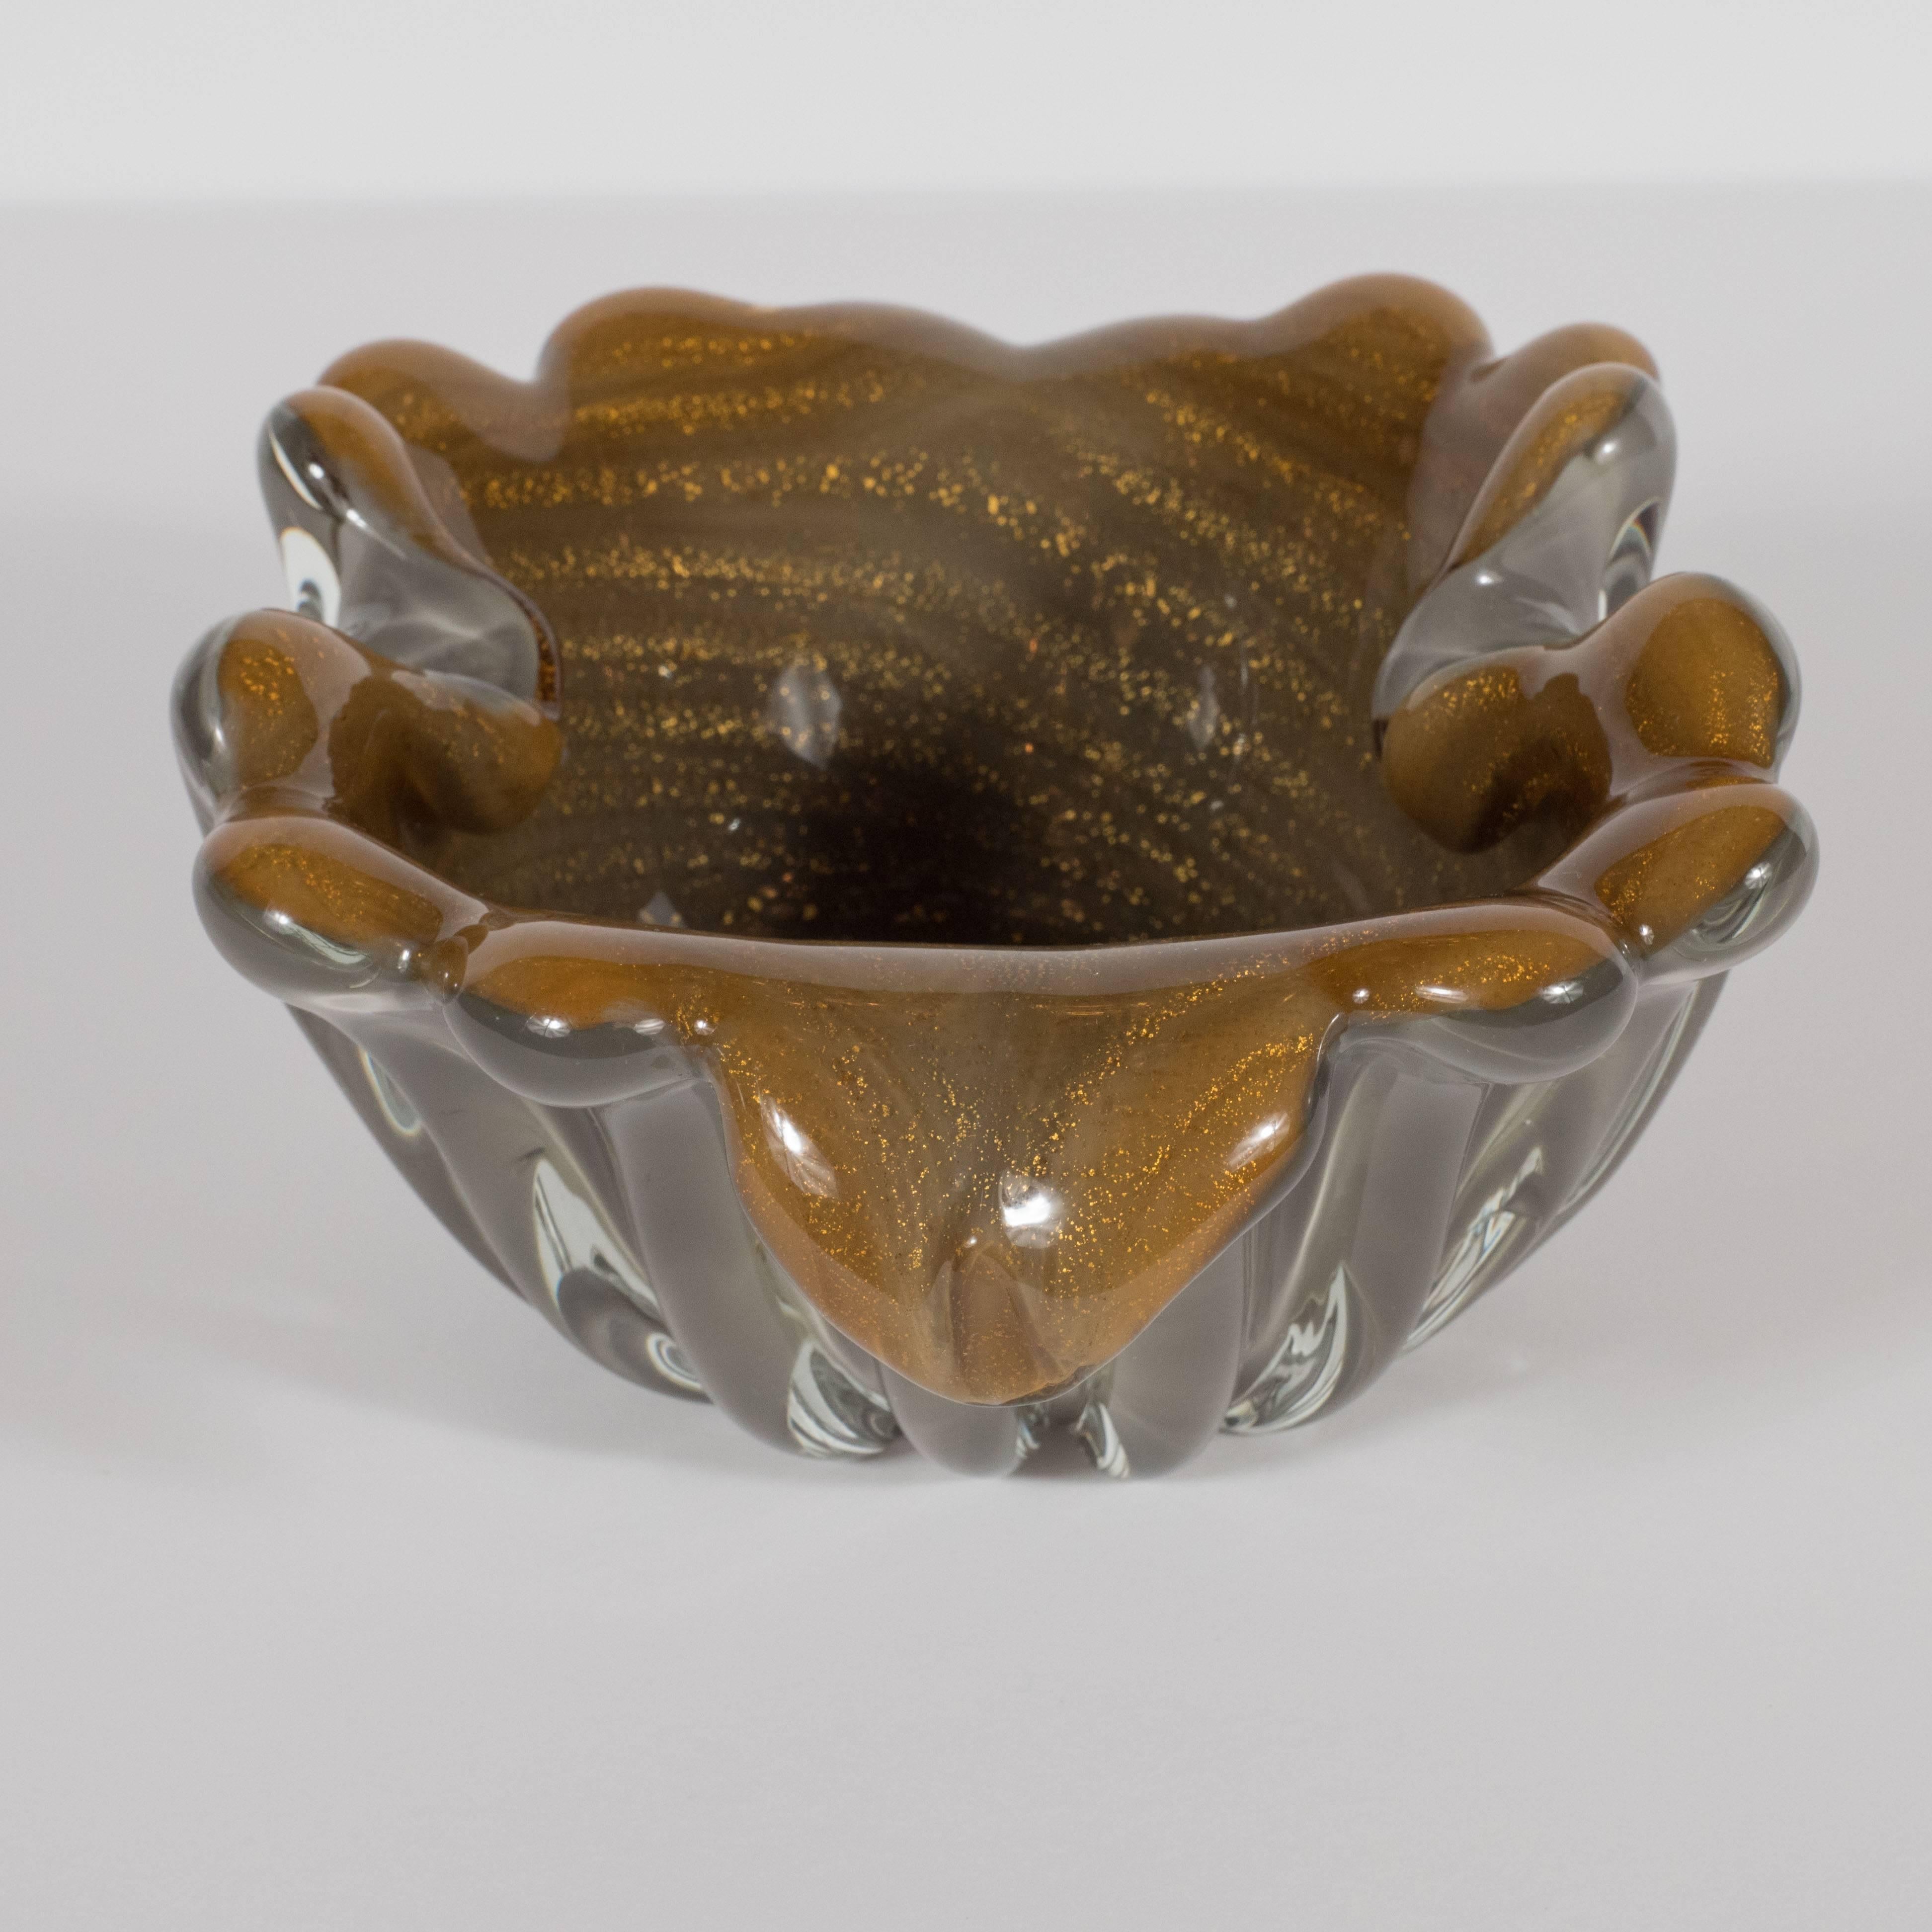 Mid-20th Century Mid-Century Modern Handblown Murano Bowl in Hues of Antique Bronze & Pewter